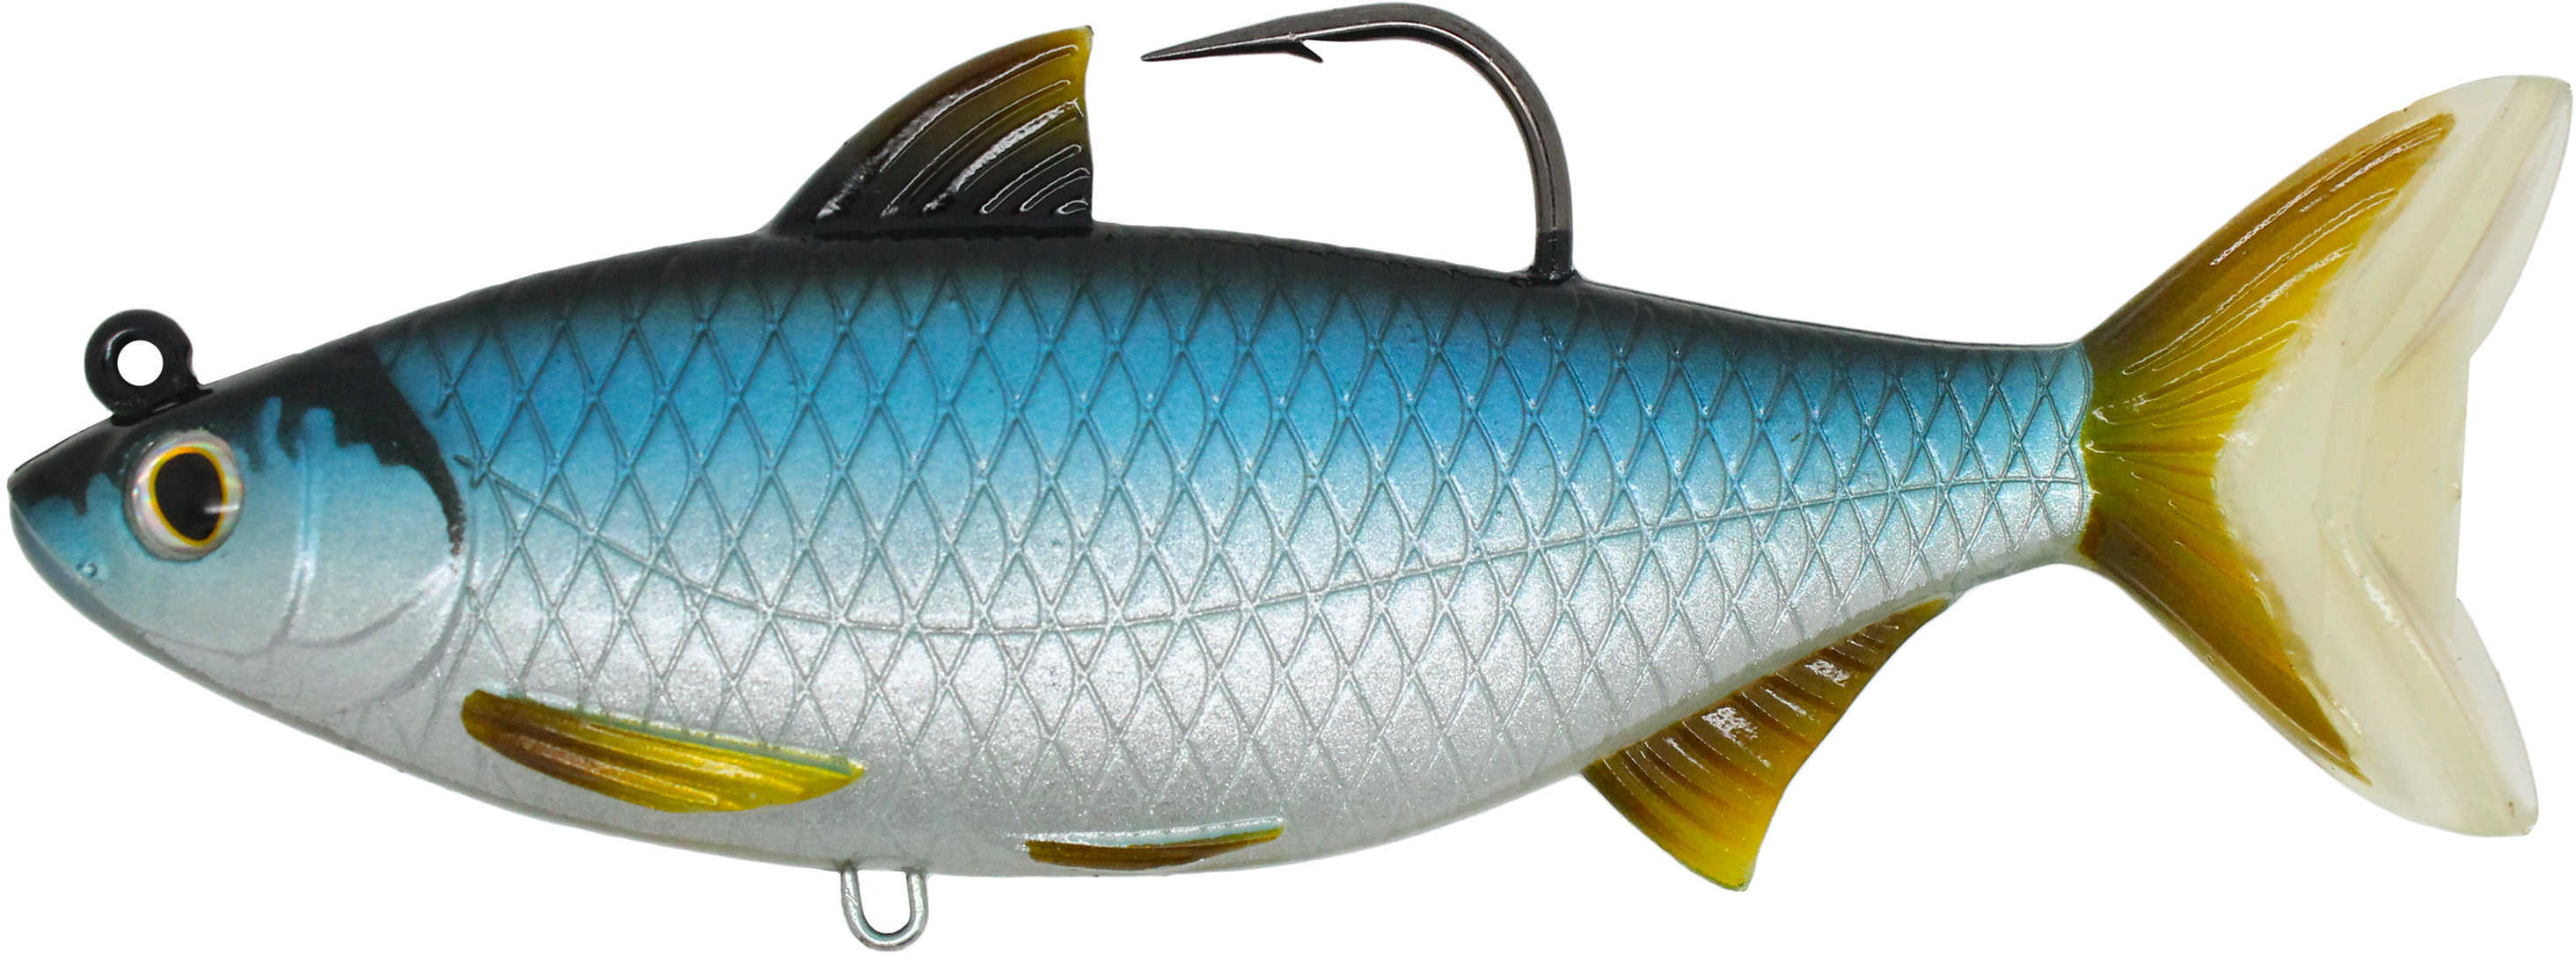 LIVETARGET Lures / Koppers Fishing and Tackle Corp Golden Shine Freshwater 5 1/2" 9/0 Hook Medium/Slow Sink Silver/Blue Md: GSS140